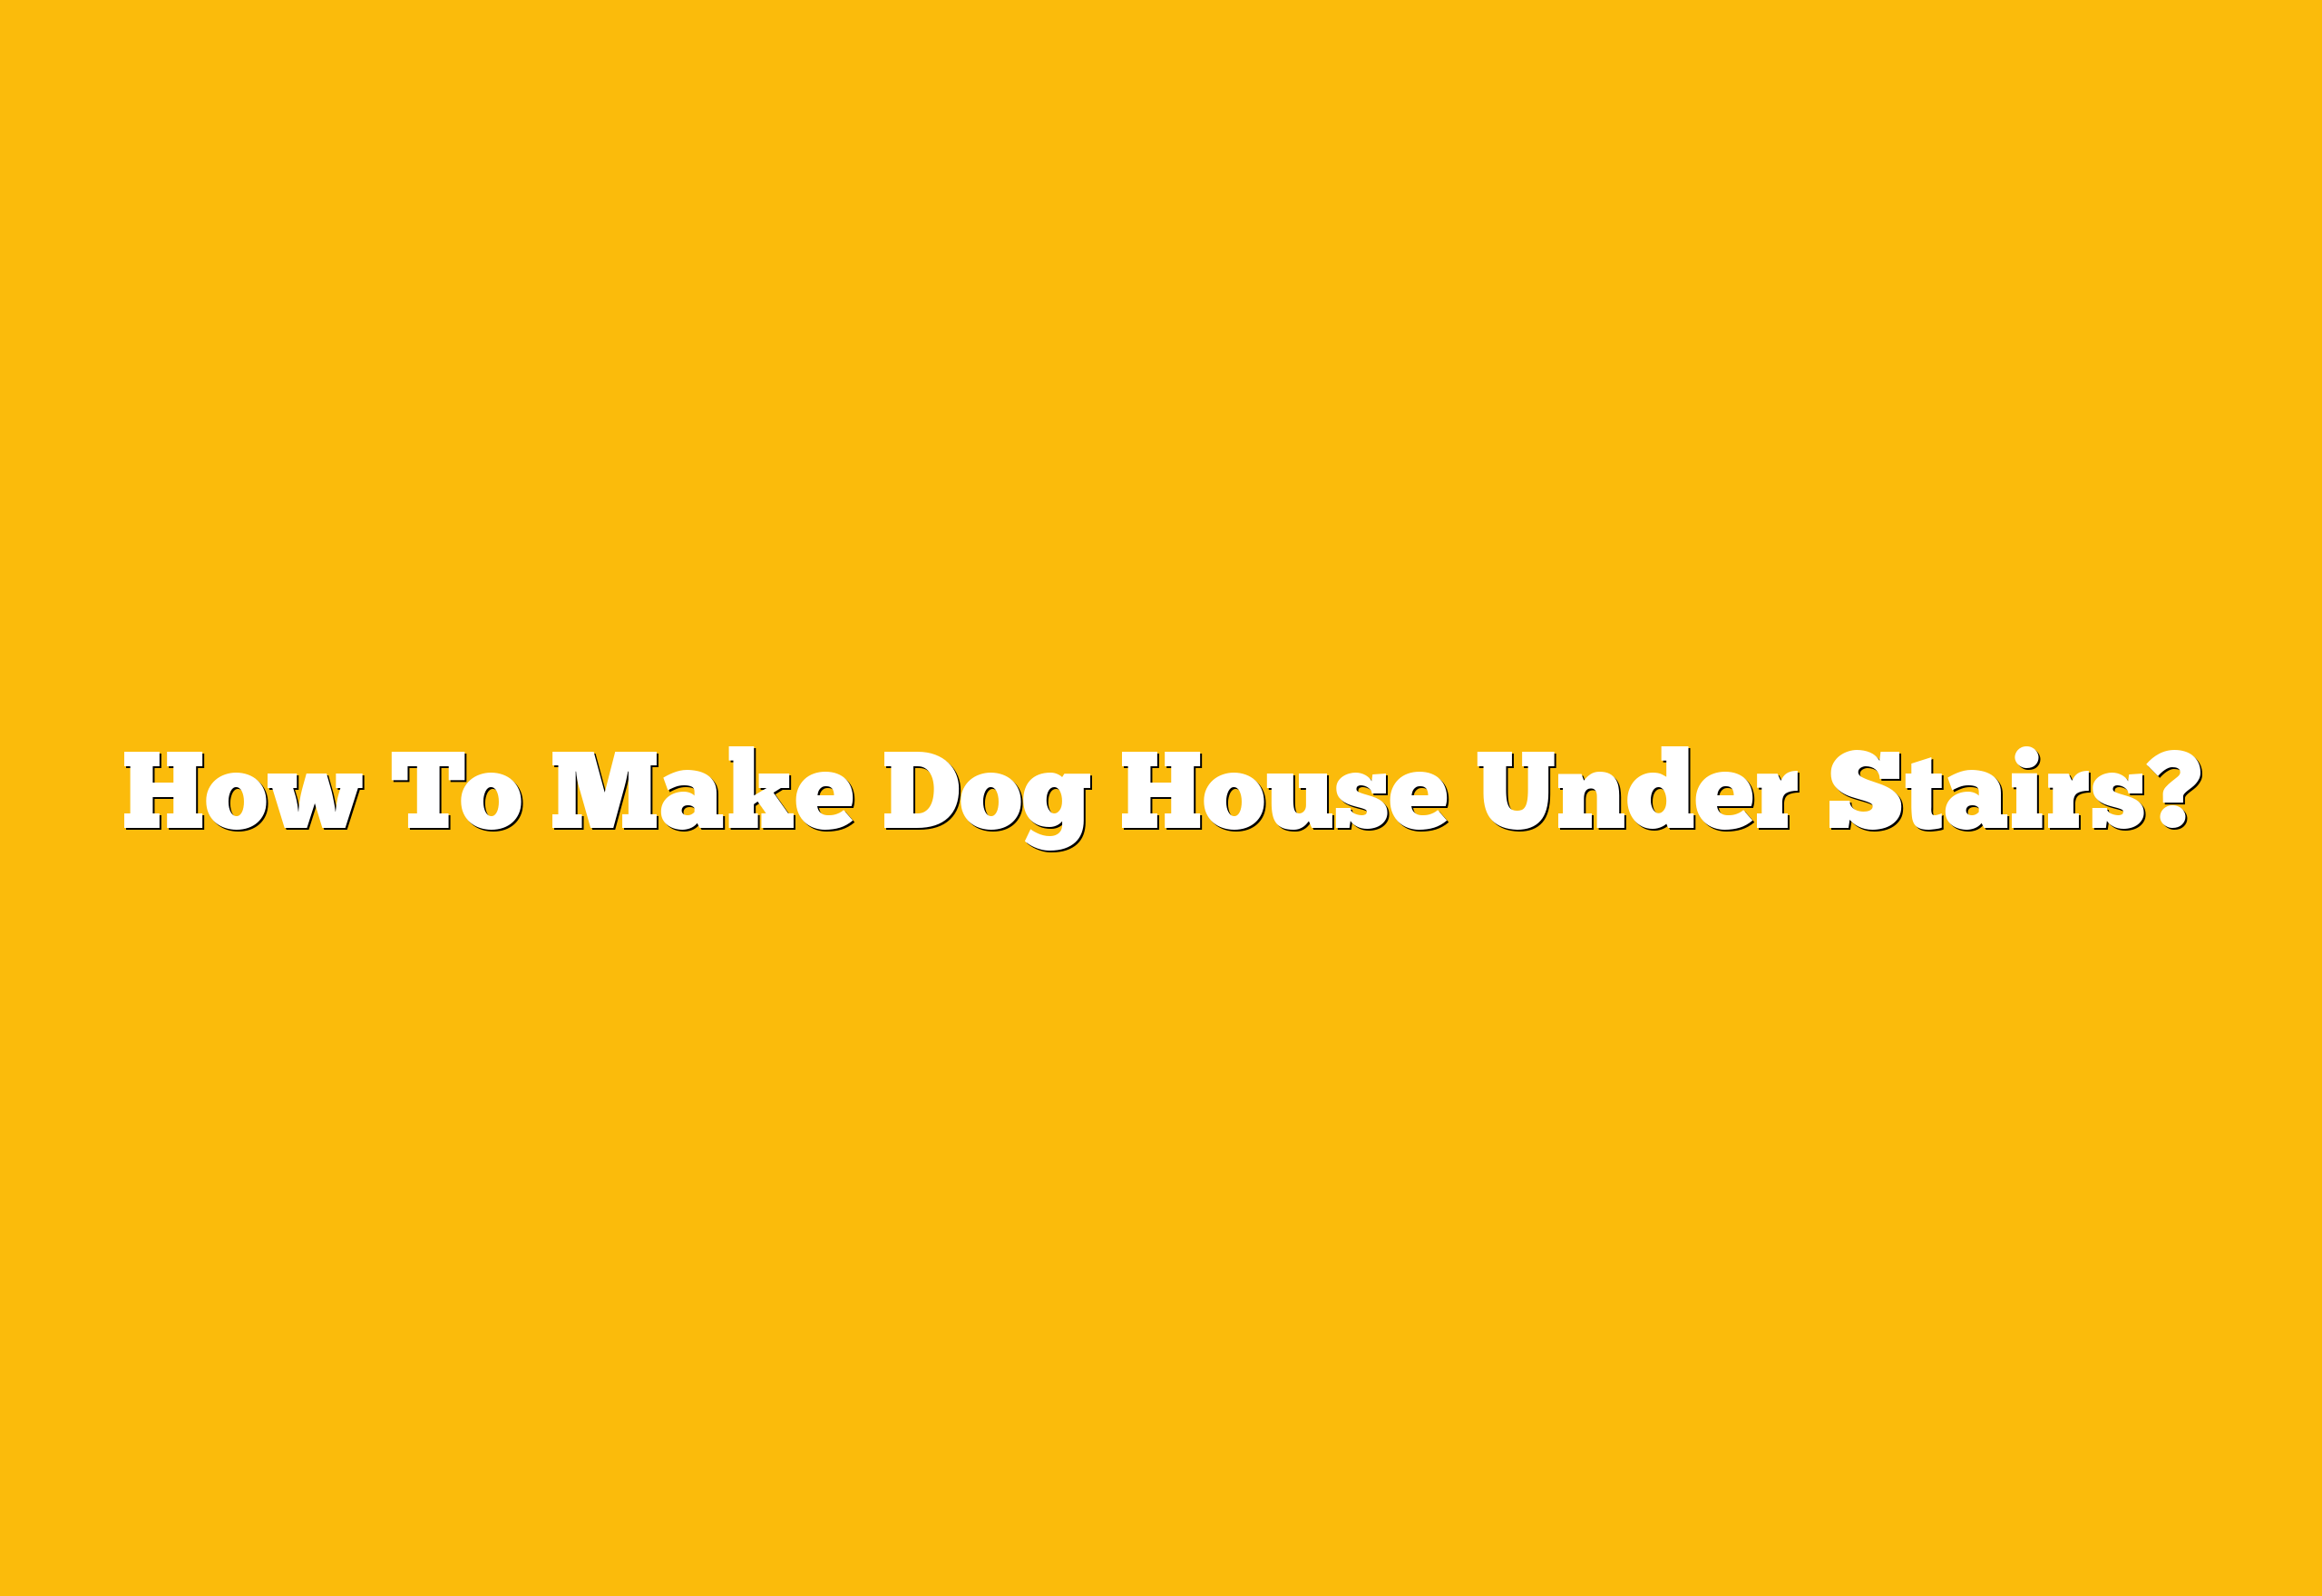 How To Make Dog House Under Stairs?